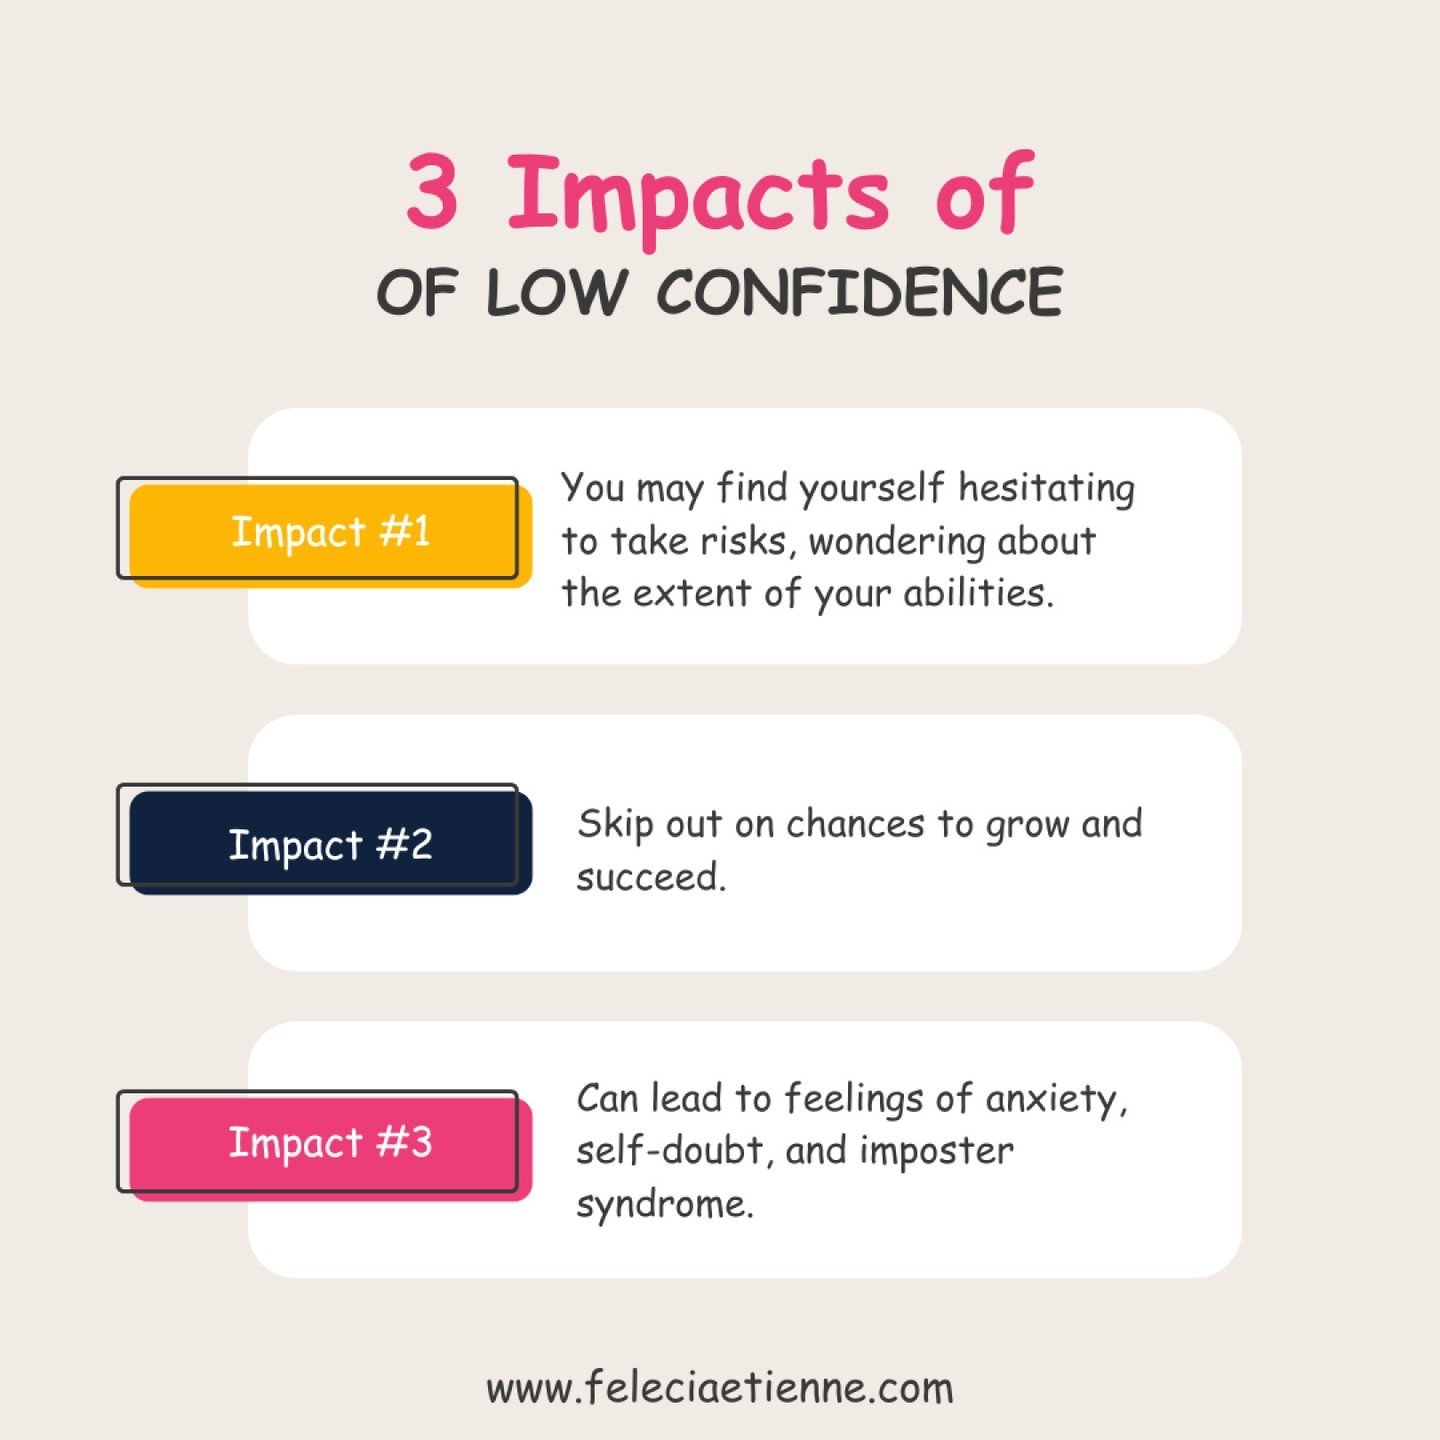 👉 Ever feel like low confidence is holding you back? You&rsquo;re not alone. But recognizing its impacts can be the first step to turning things around.

Low confidence often means not taking chances. This can lead to missed career advancements, net